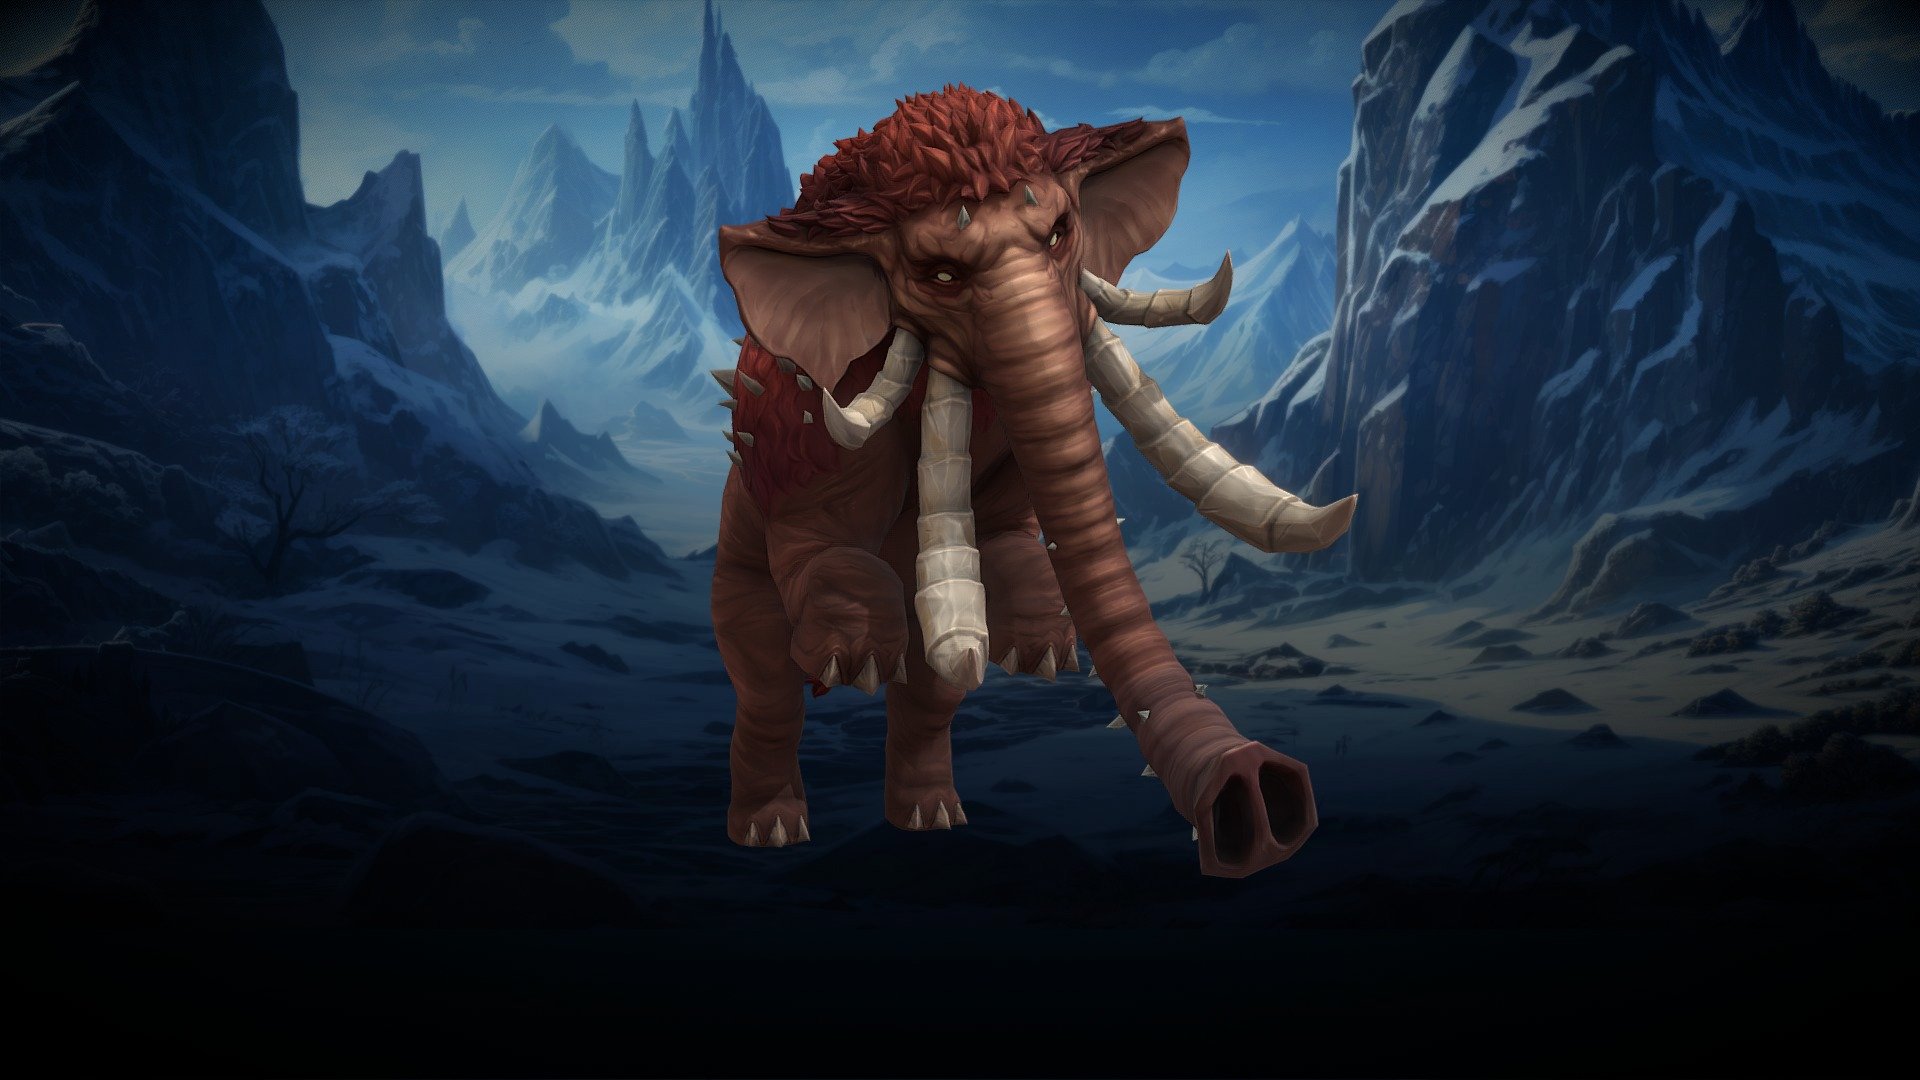 Stylized character for a project.

Software used: Zbrush, Autodesk Maya, Autodesk 3ds Max, Substance Painter - Stylized Fantasy Wild Mammoth - 3D model by N-hance Studio (@Malice6731) 3d model